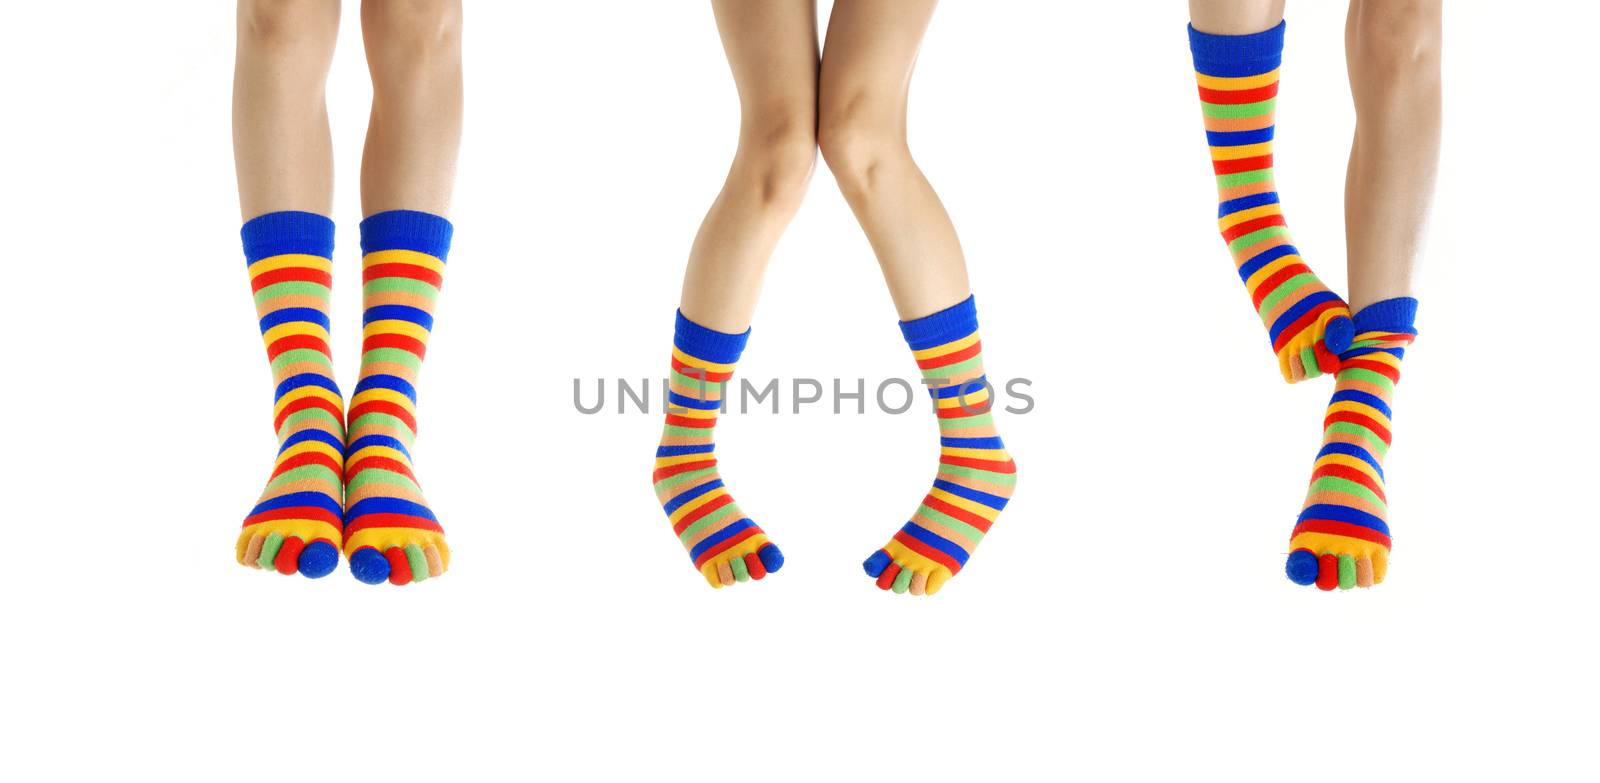 Three couples of woman legs in stripped socks